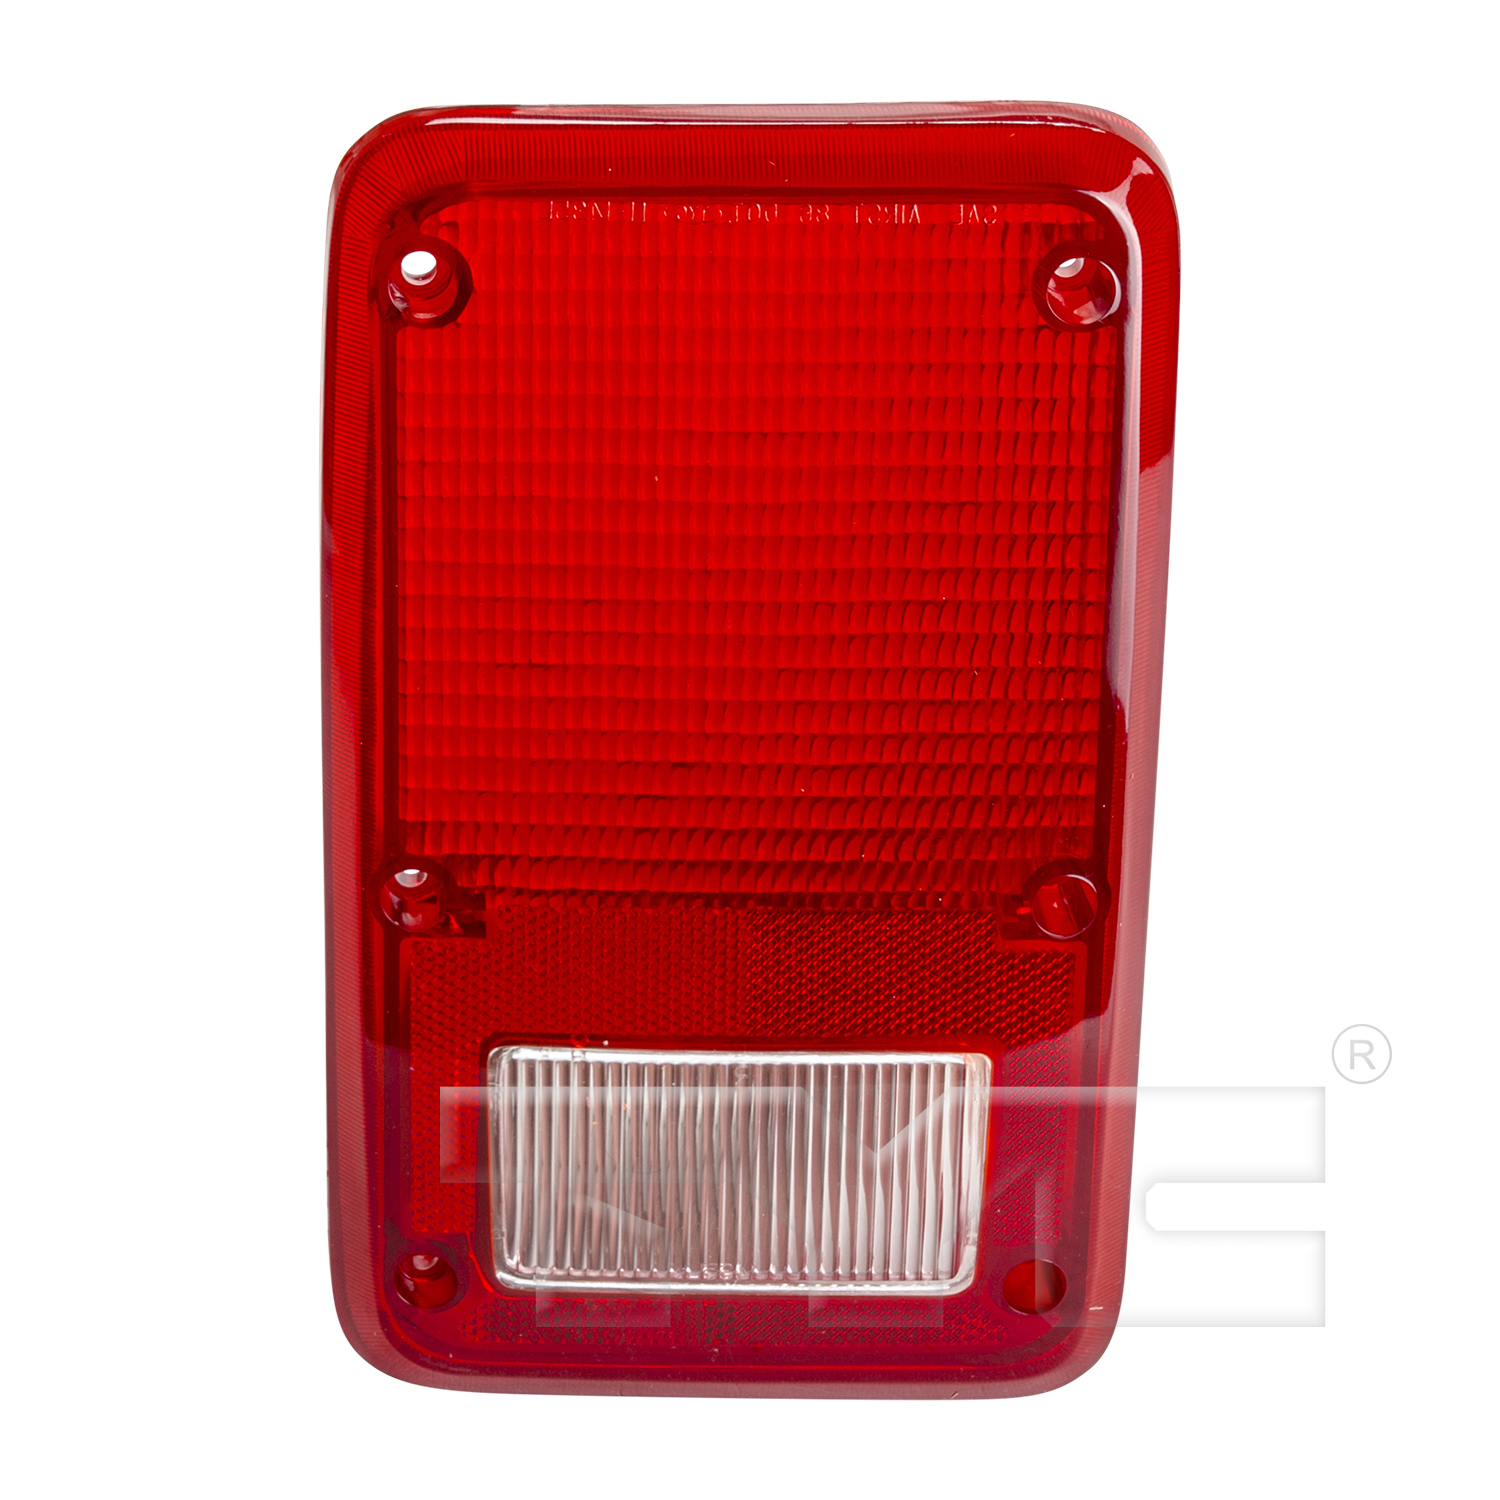 Aftermarket TAILLIGHTS for DODGE - B100, B100,78-80,LT Taillamp lens